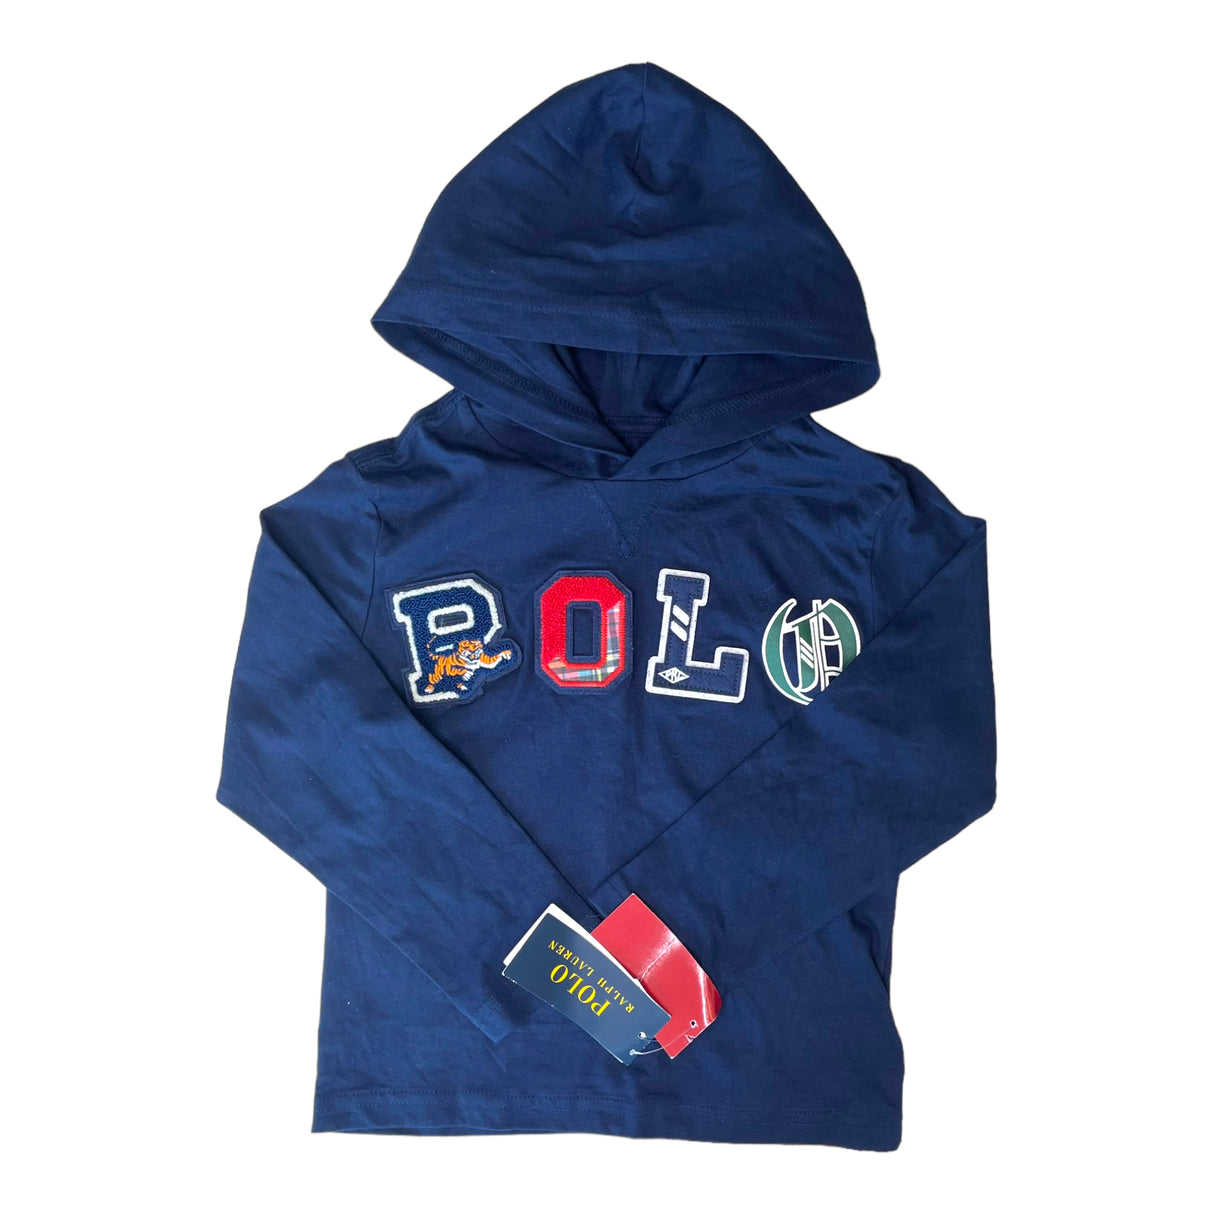 A Second Chance - Polo Ralph Lauren Kids Navy Hoodie - Brand New - Delivery All Over Lebanon